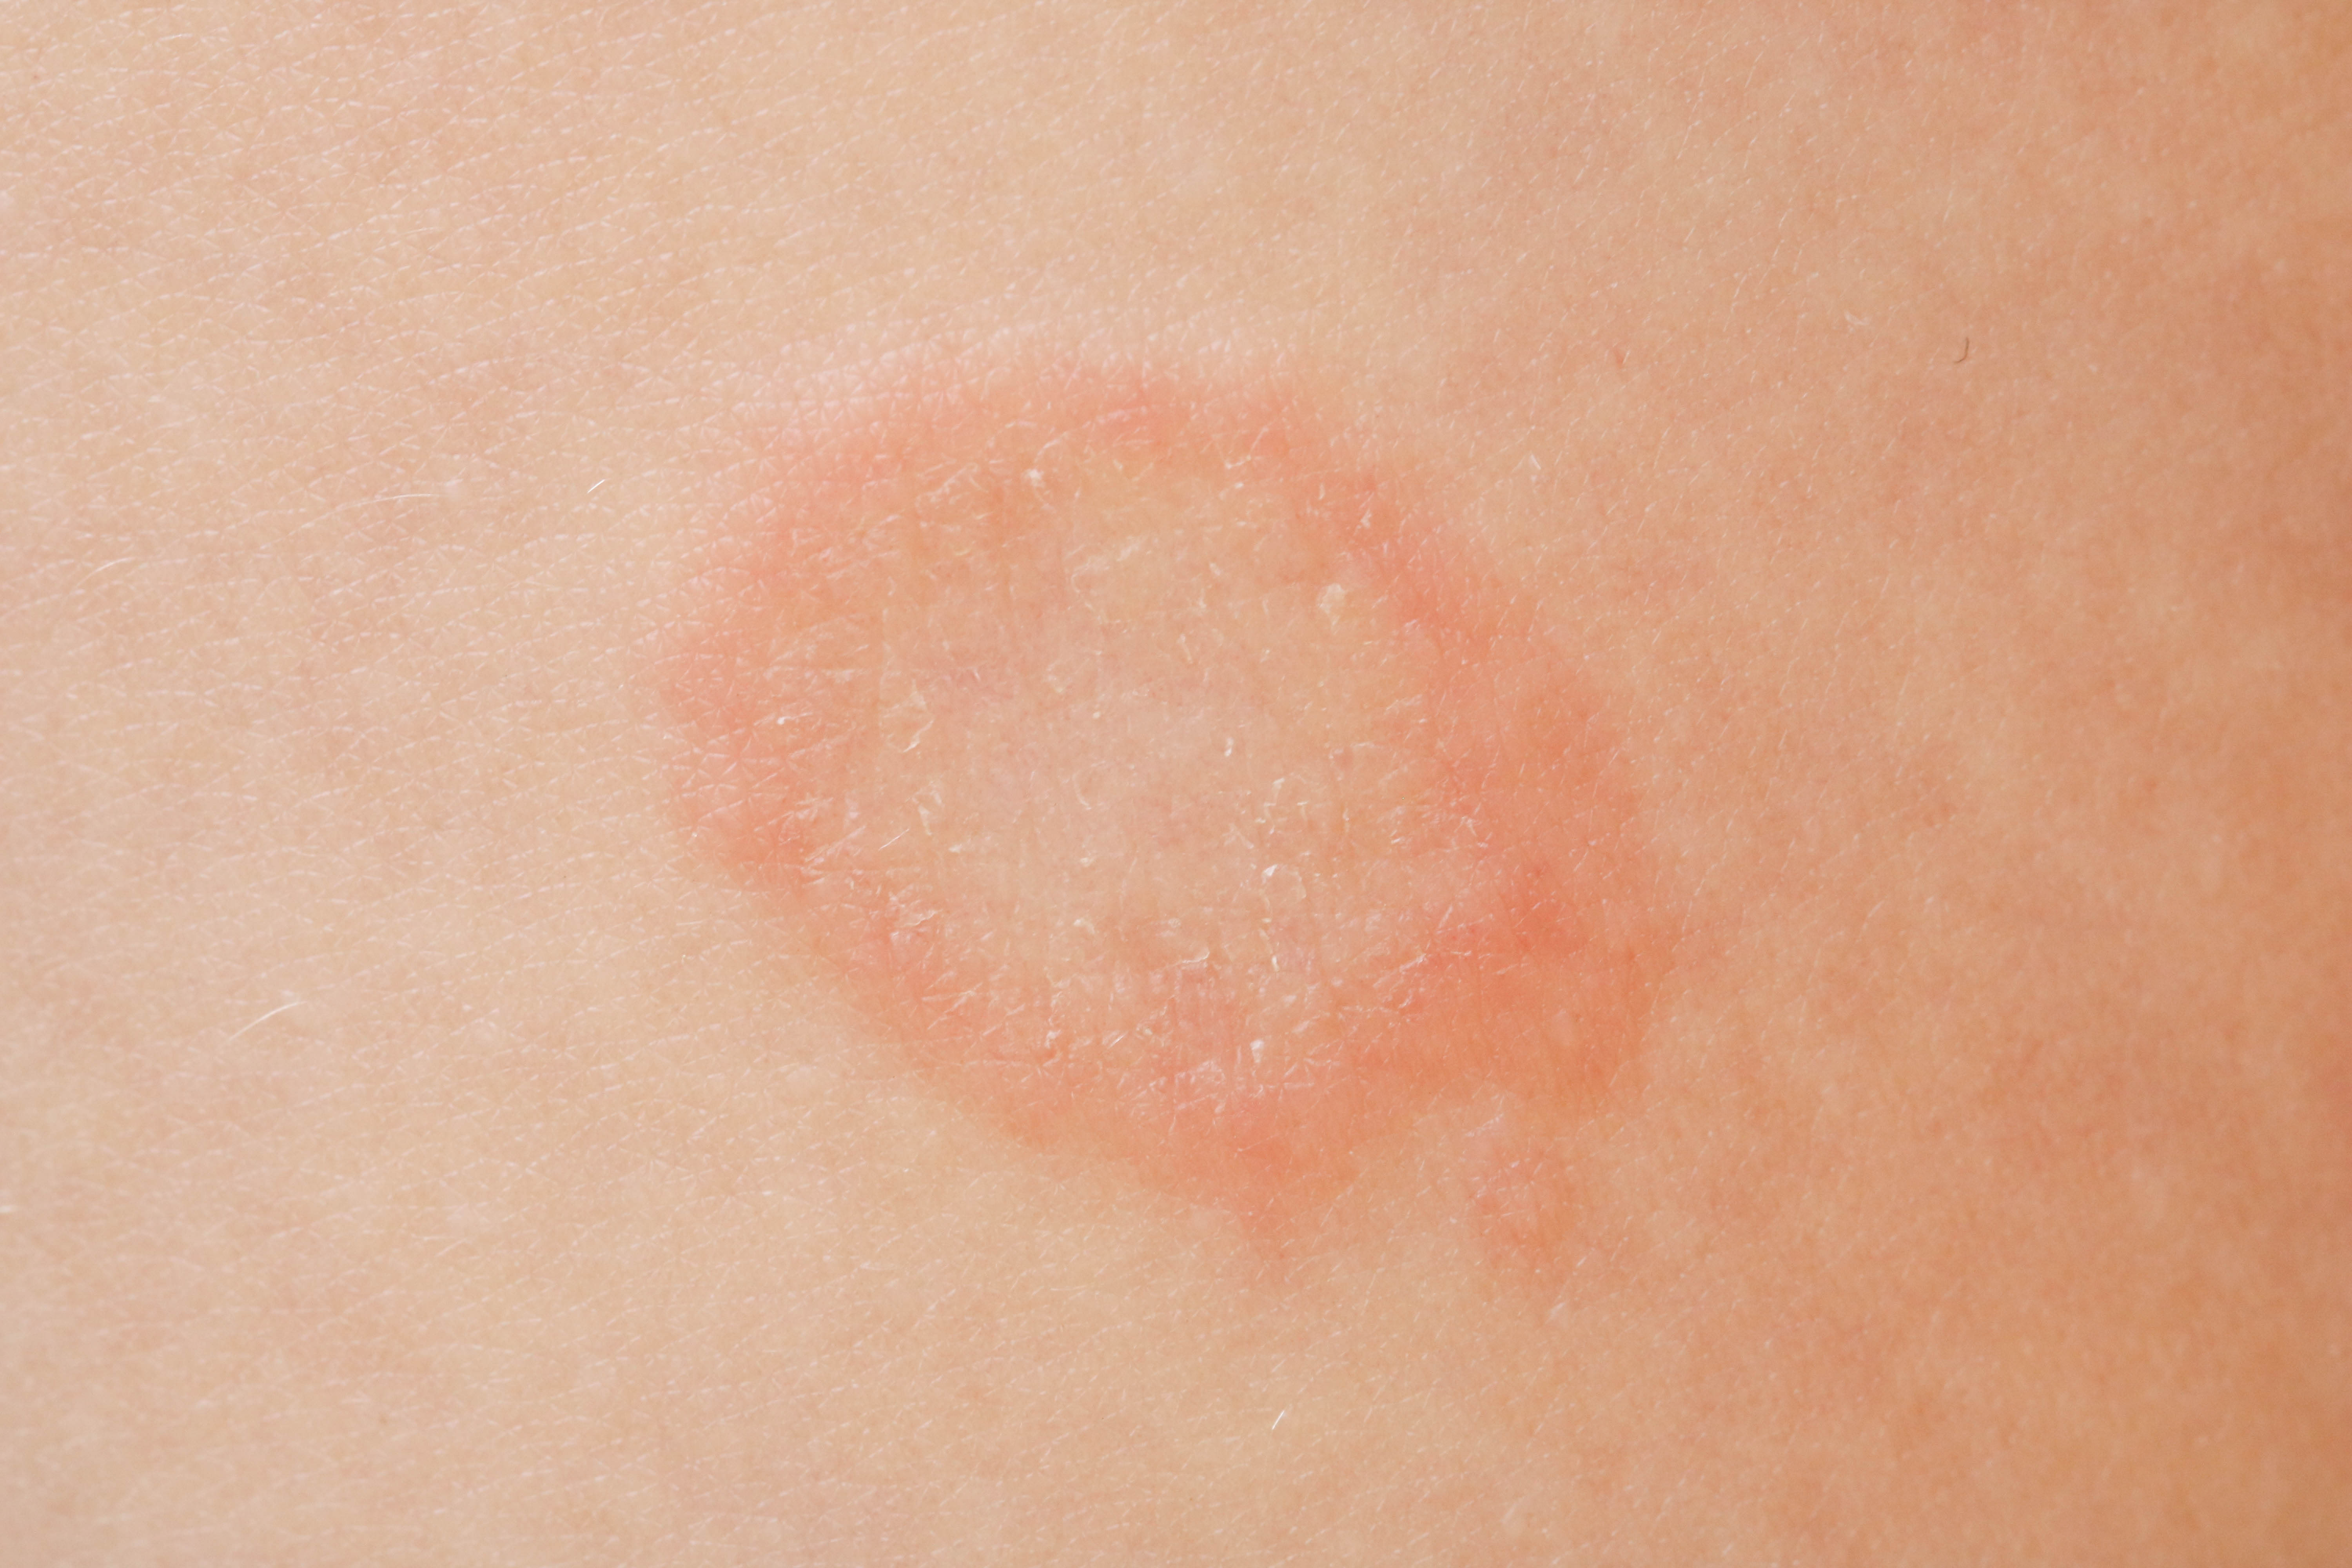 Highly contagious form of sexually transmitted ringworm reported in the US for the 1st time